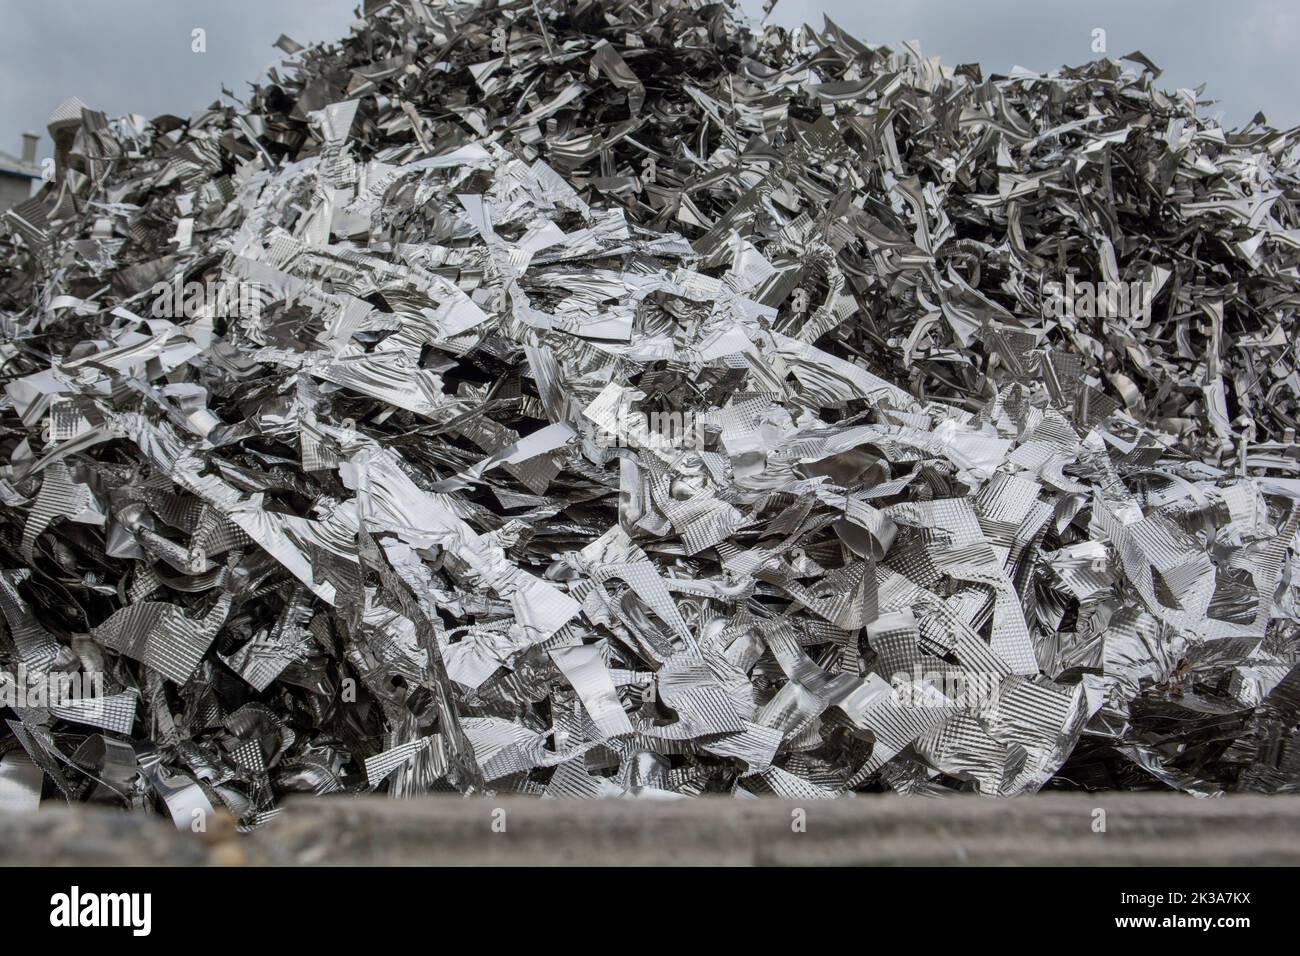 Scrap metal heap. Discarded material sorted and  prepared for recycling. Stock Photo